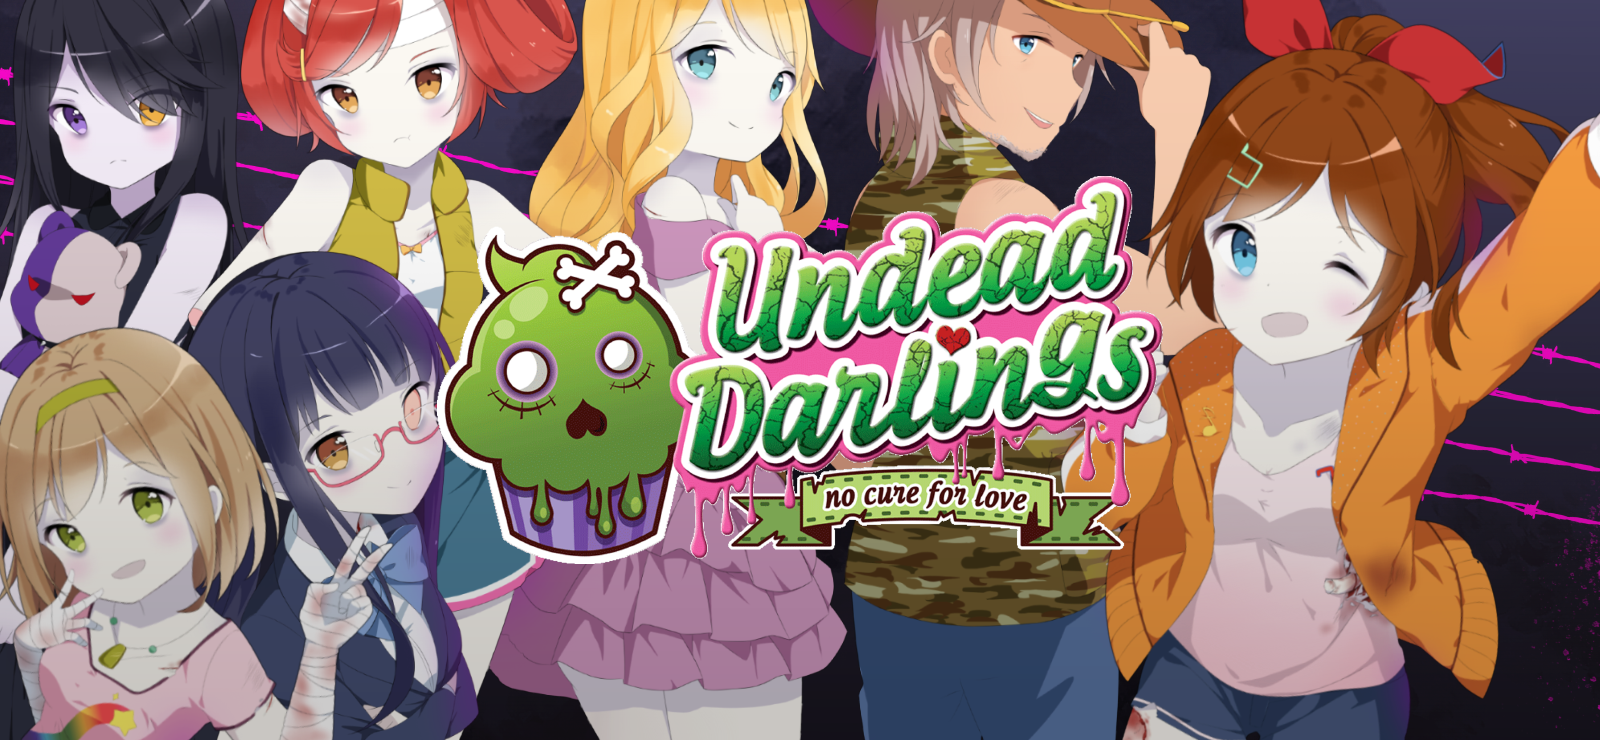 Undead Darlings ~no Cure For Love~